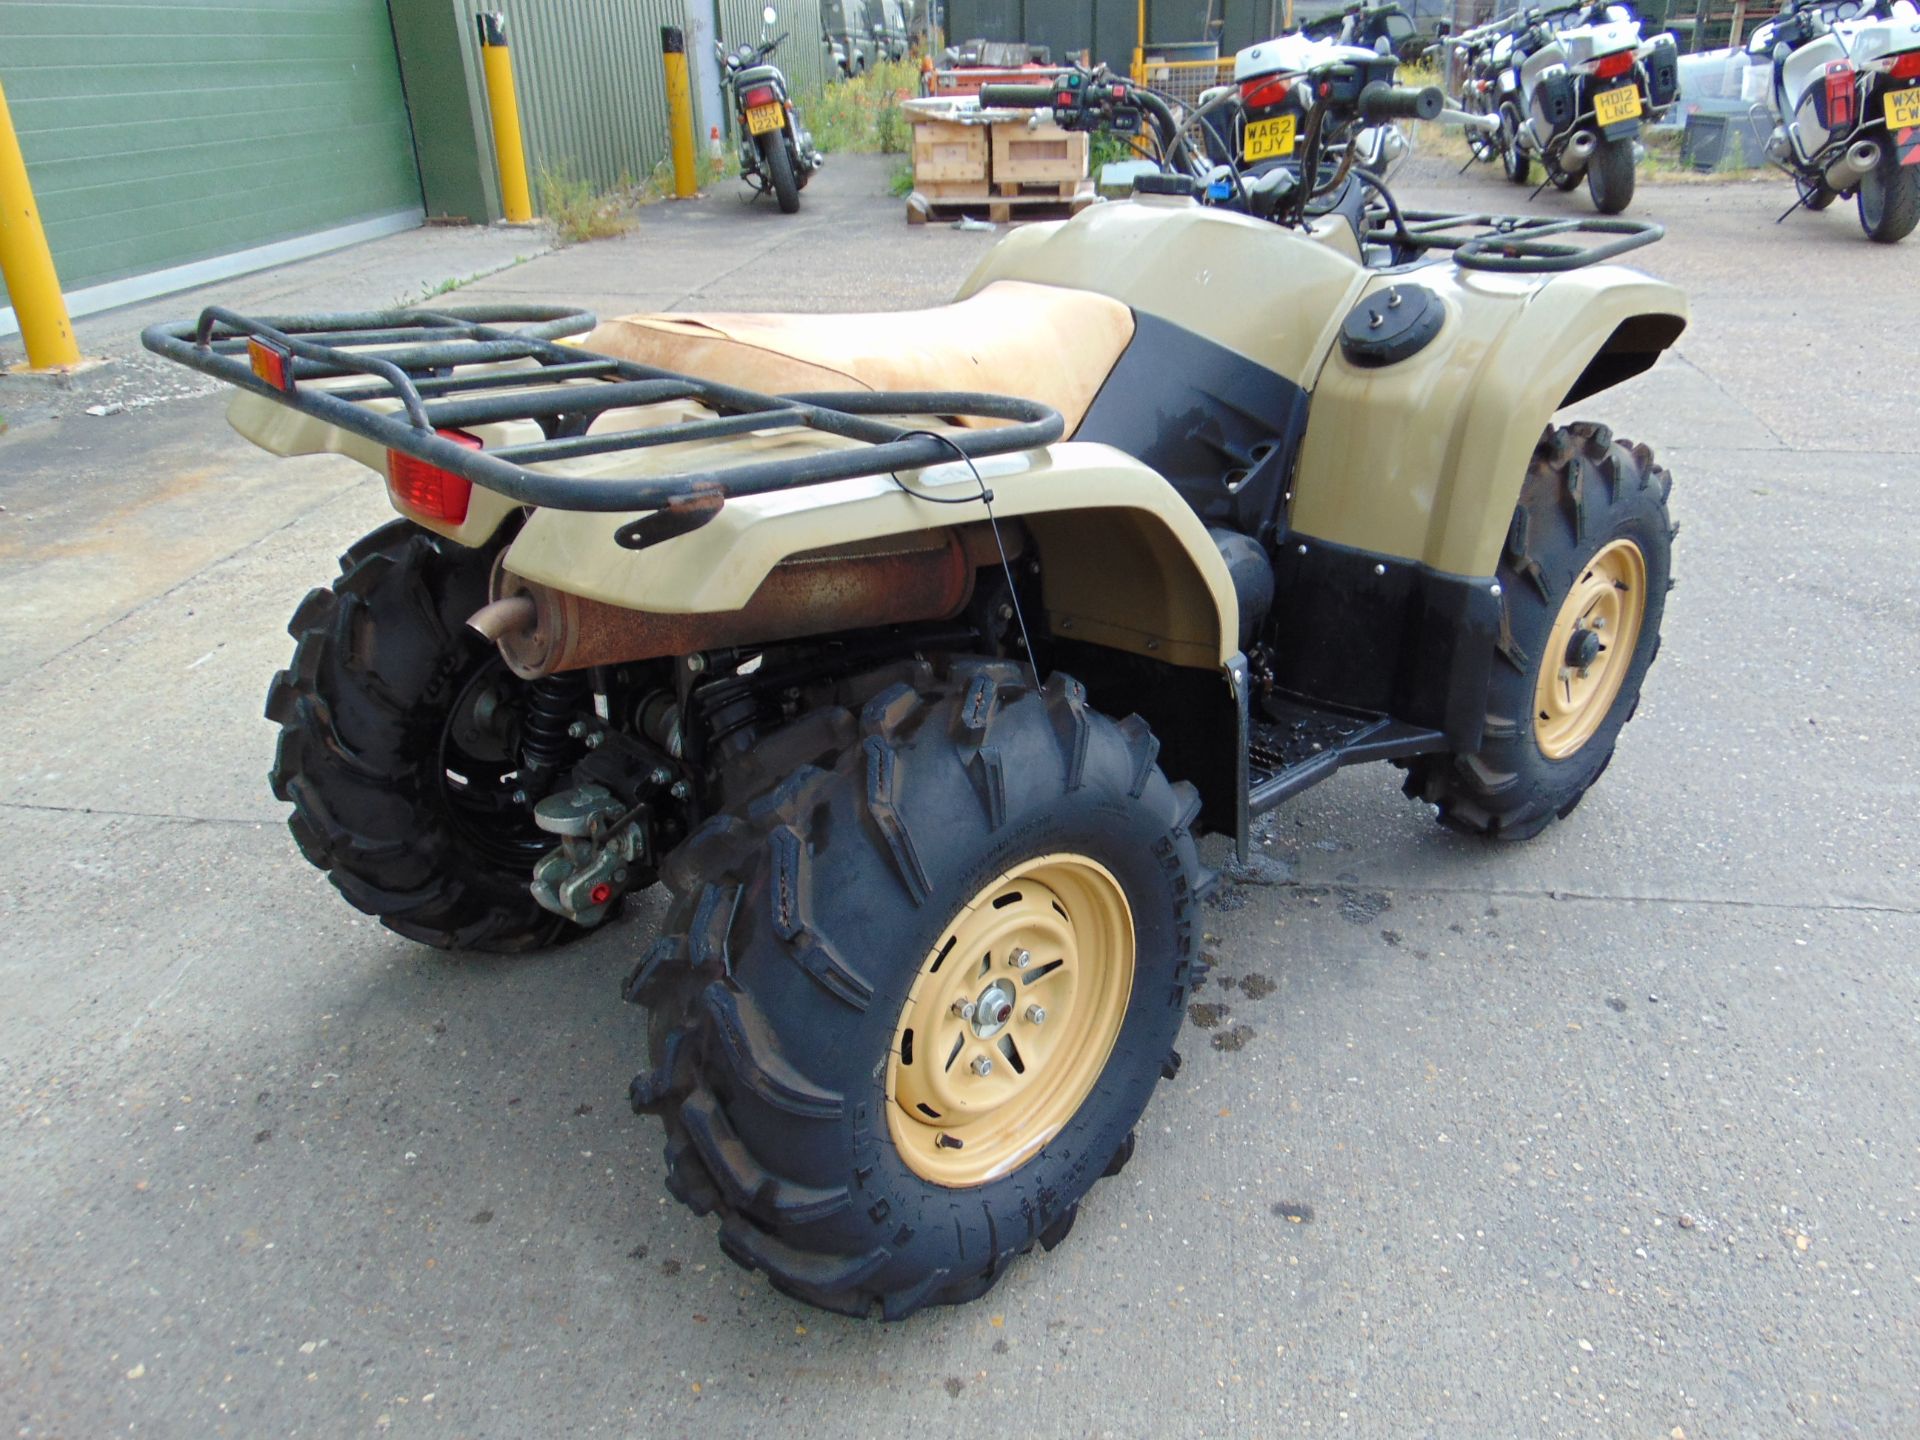 Military Specification Yamaha Grizzly 450 4 x 4 ATV Quad Bike ONLY 213 HOURS! - Image 6 of 18